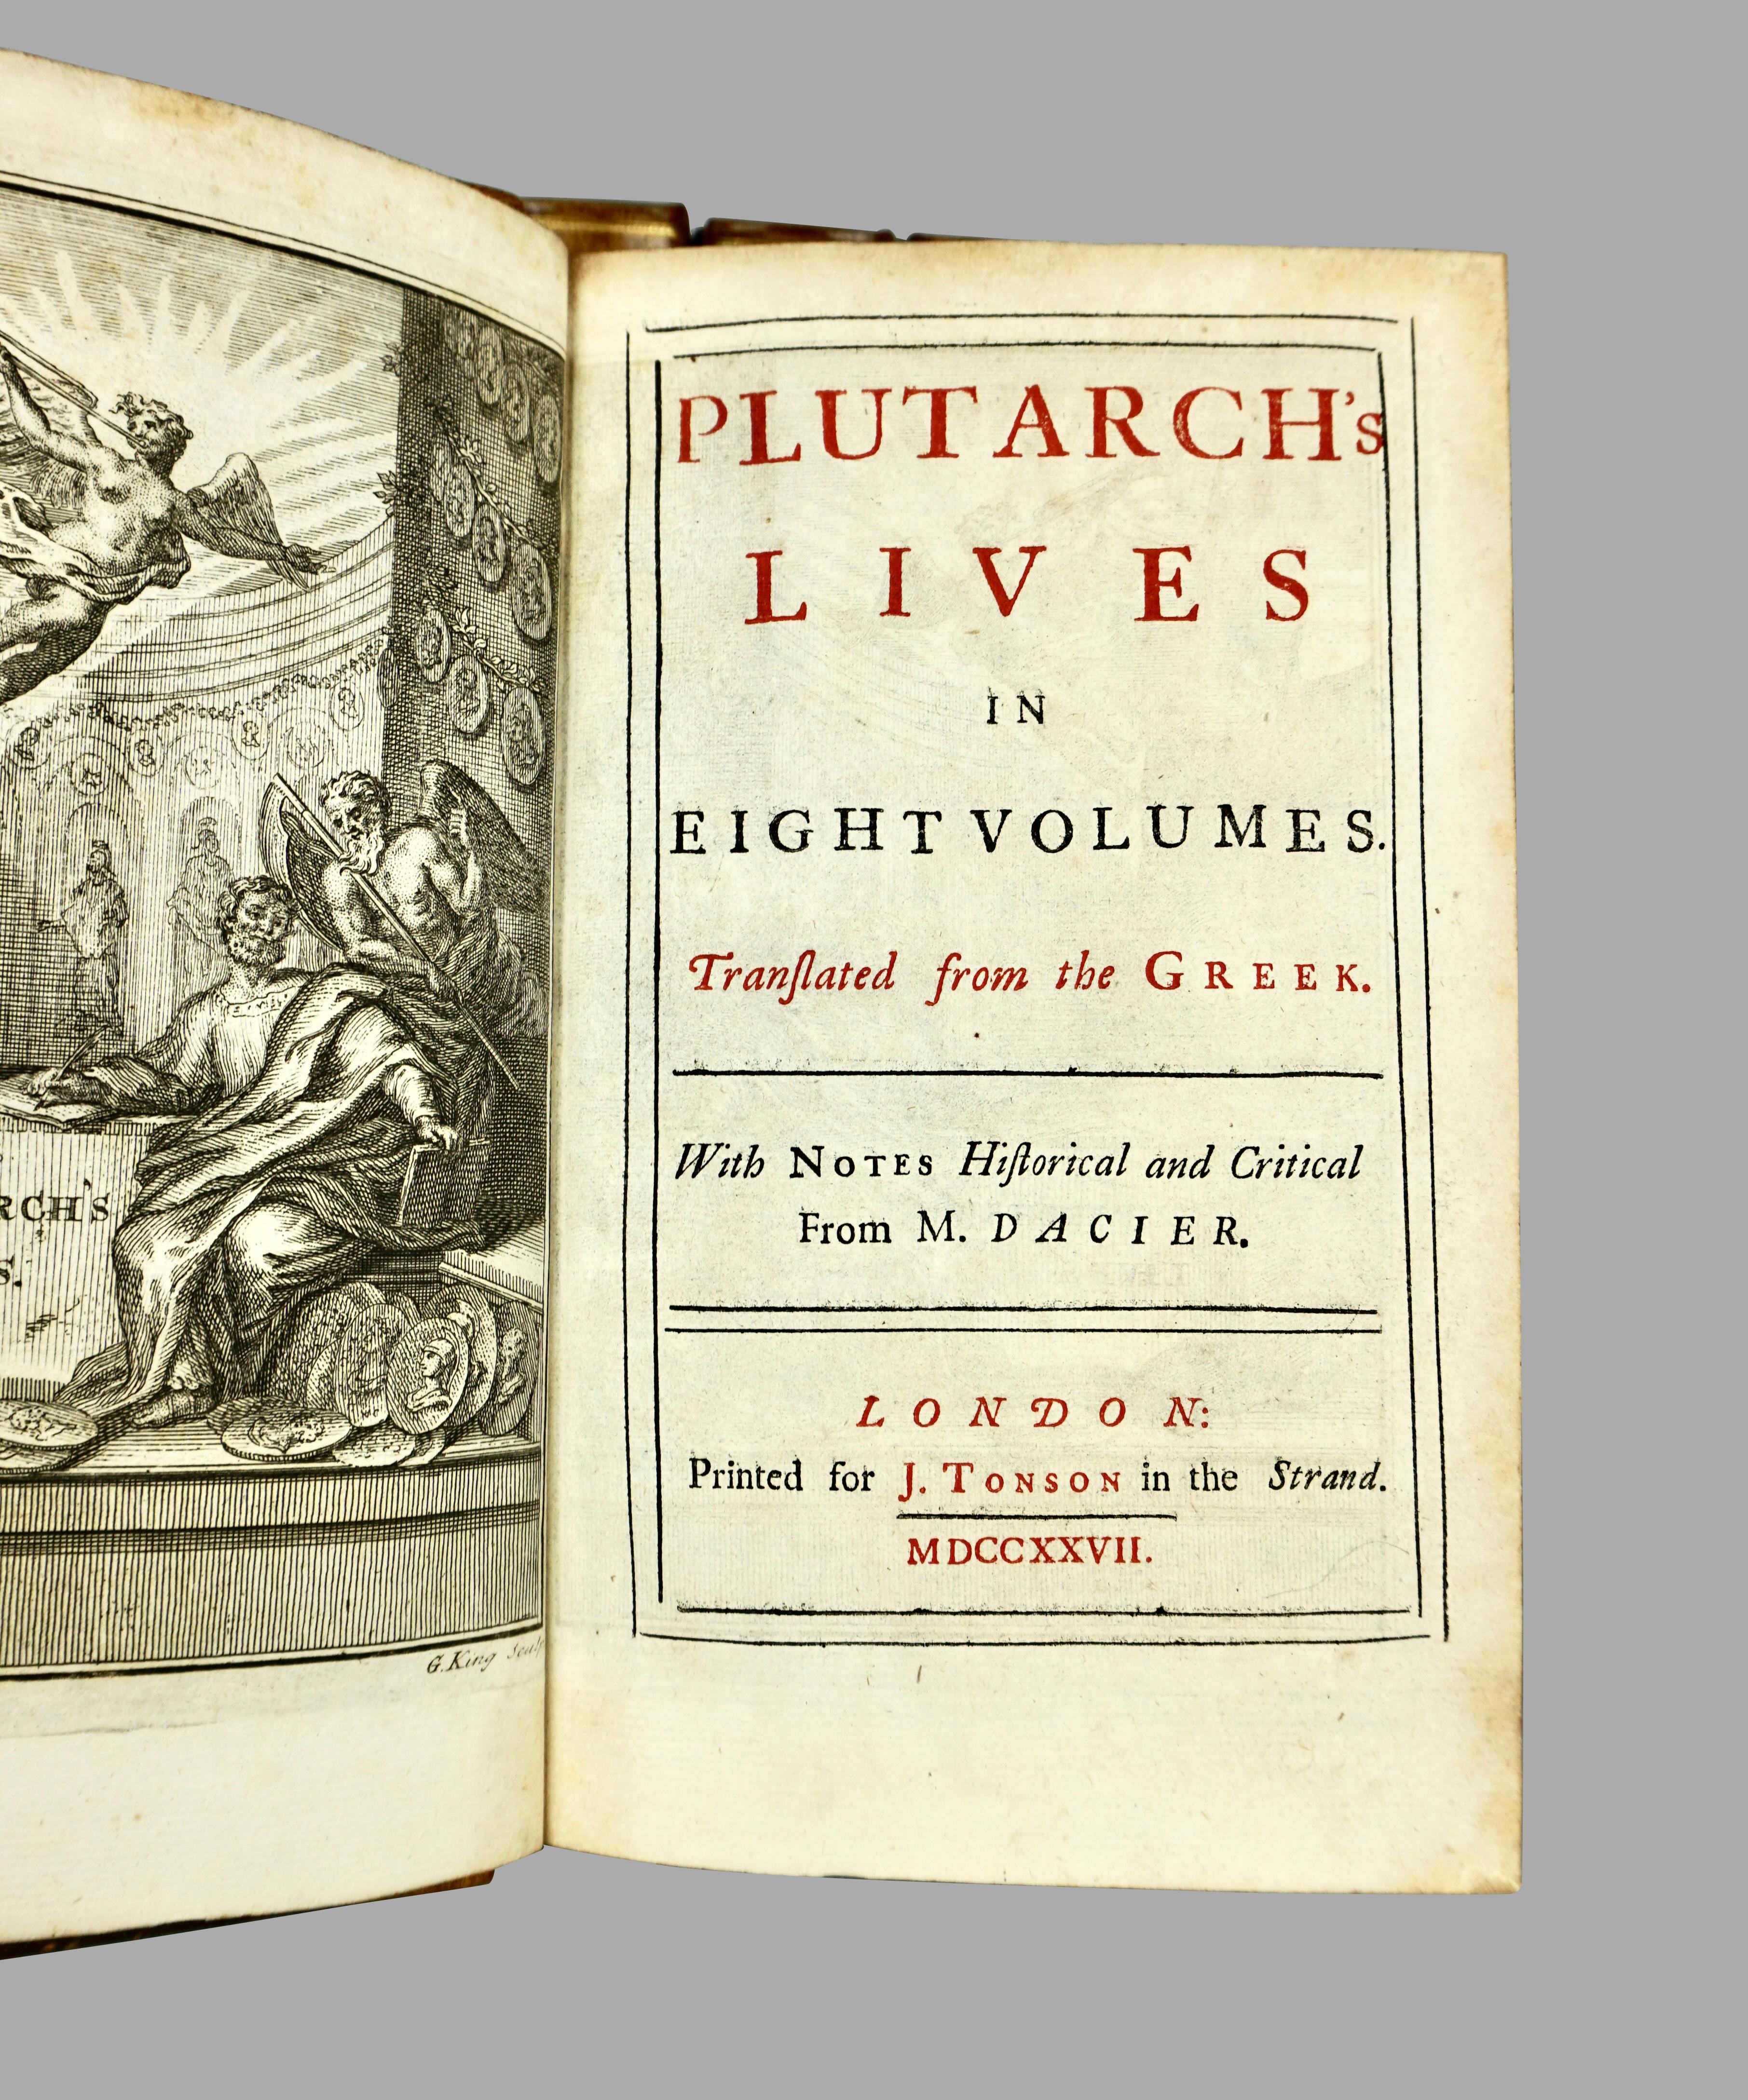 Plutarch's Lives in 8 Leatherbound Volumes Published London, J. Tonson 1727 1